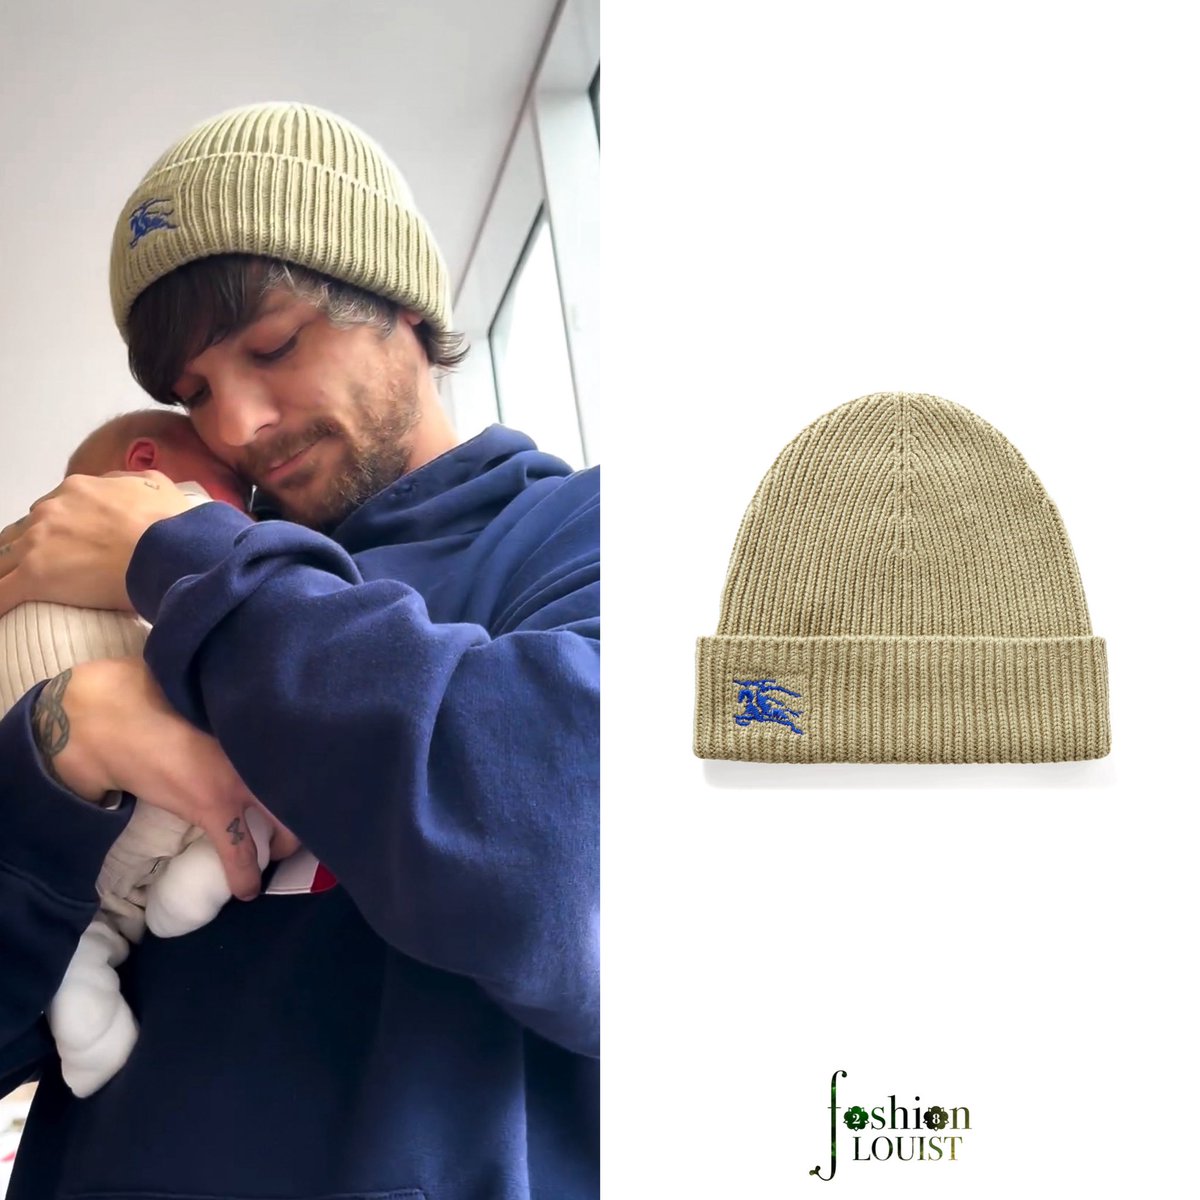 Louis wore a Burberry Ribbed Cashmere Beanie in Hunter in a recently shared video with his niece

A ribbed beanie in cashmere embroidered with the Equestrian Knight. Made at a 200 year old Scottish mill the fabric is brushed with teasels for a soft finish uk.burberry.com/ribbed-cashmer…